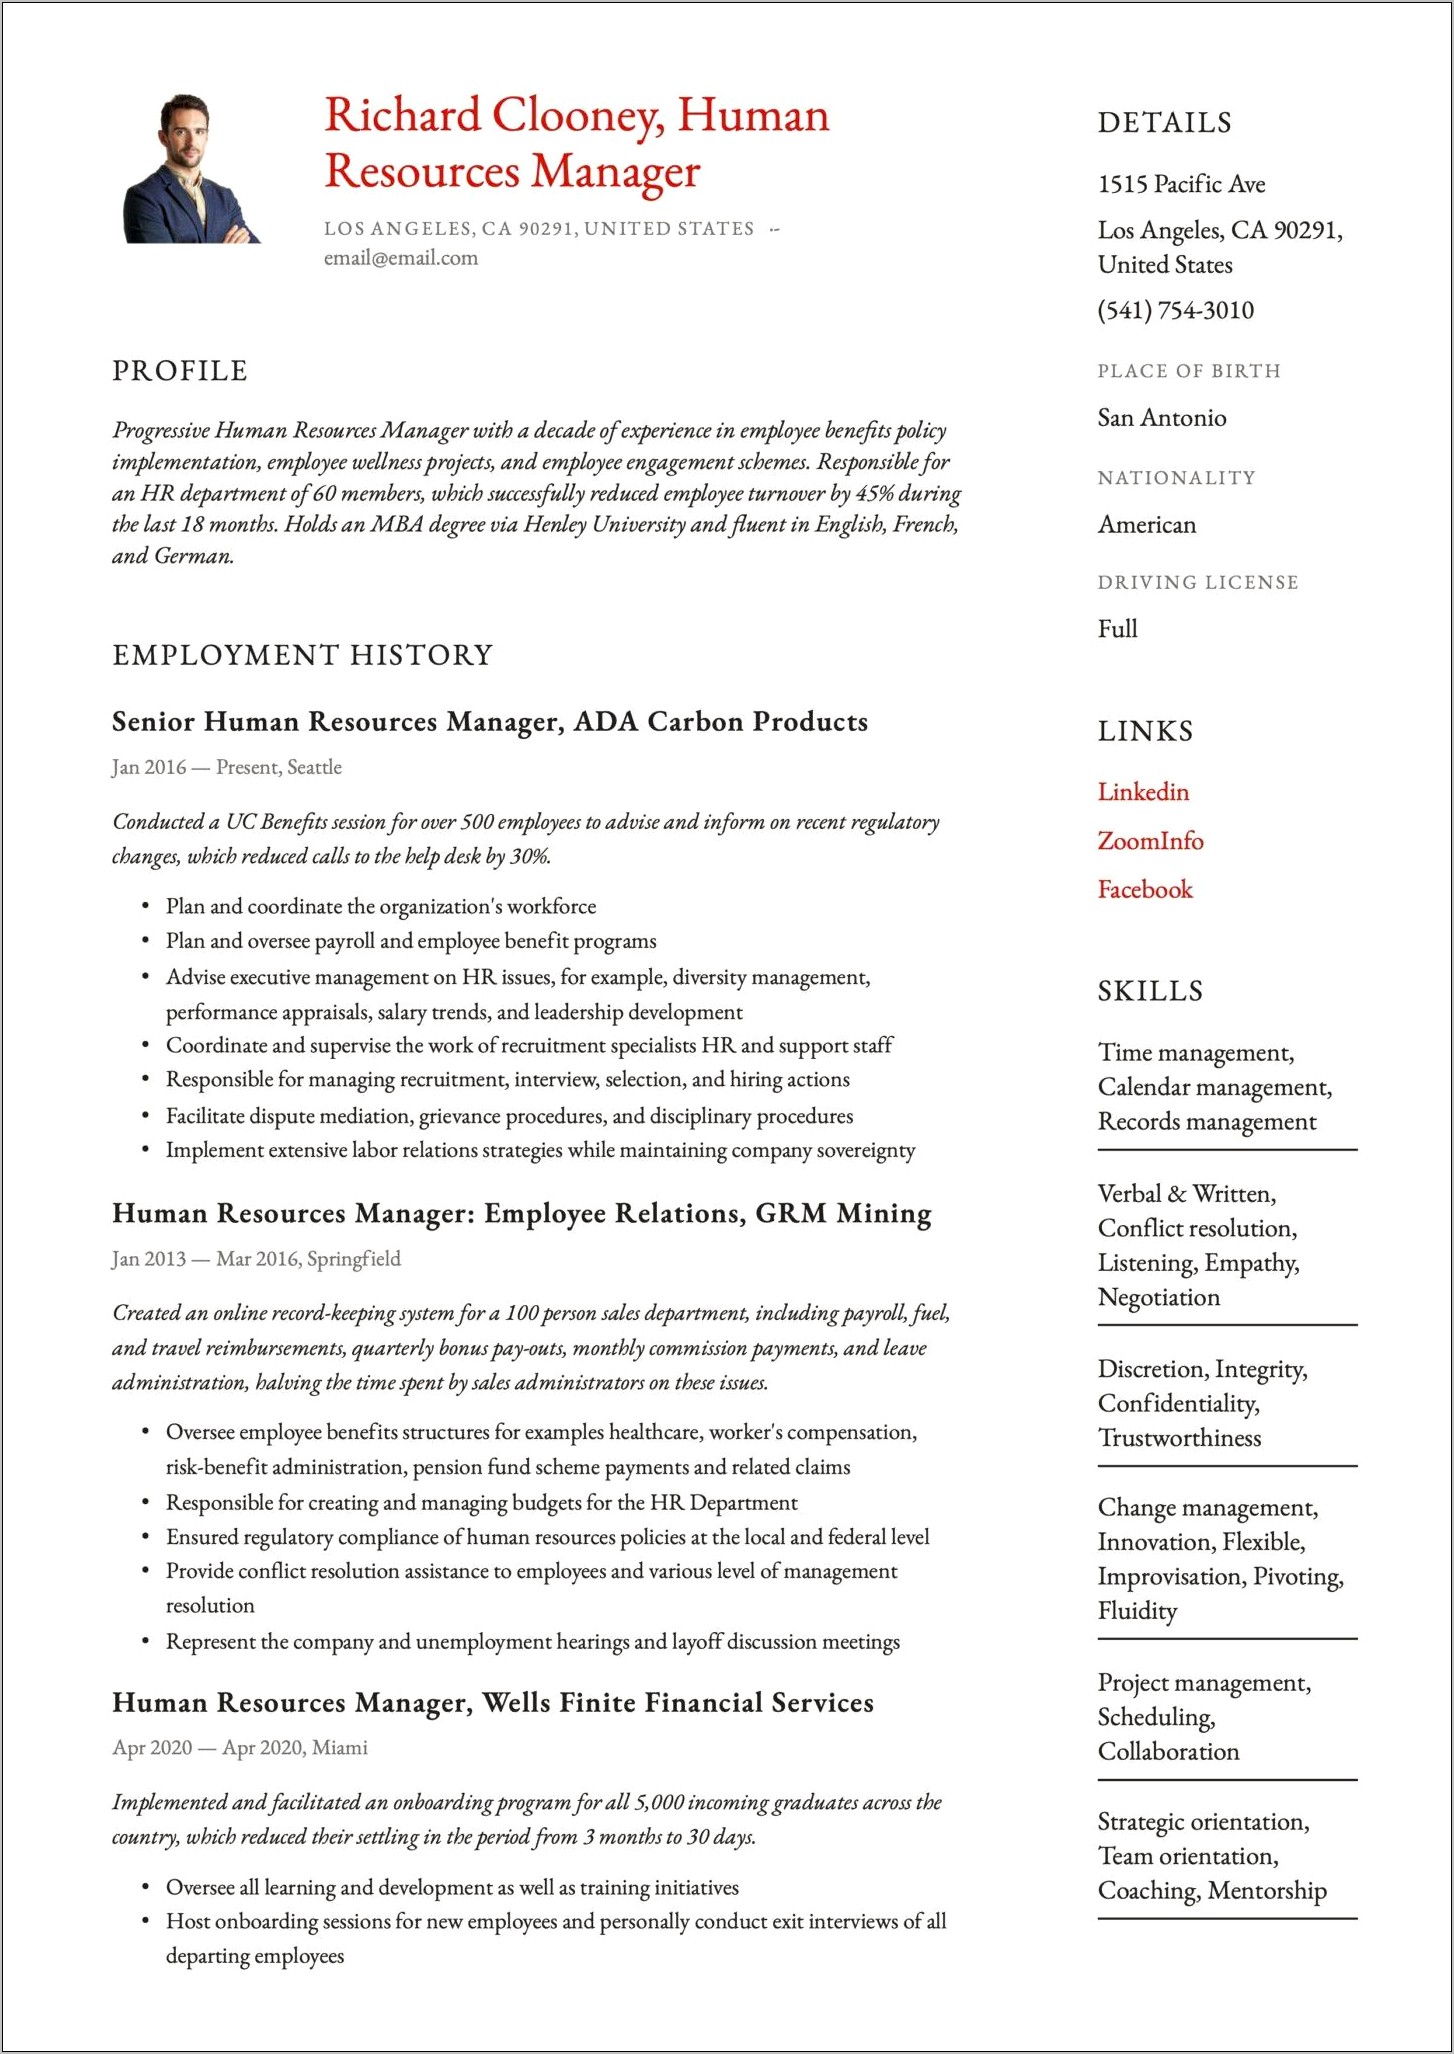 Human Resources Manager Resume Experience